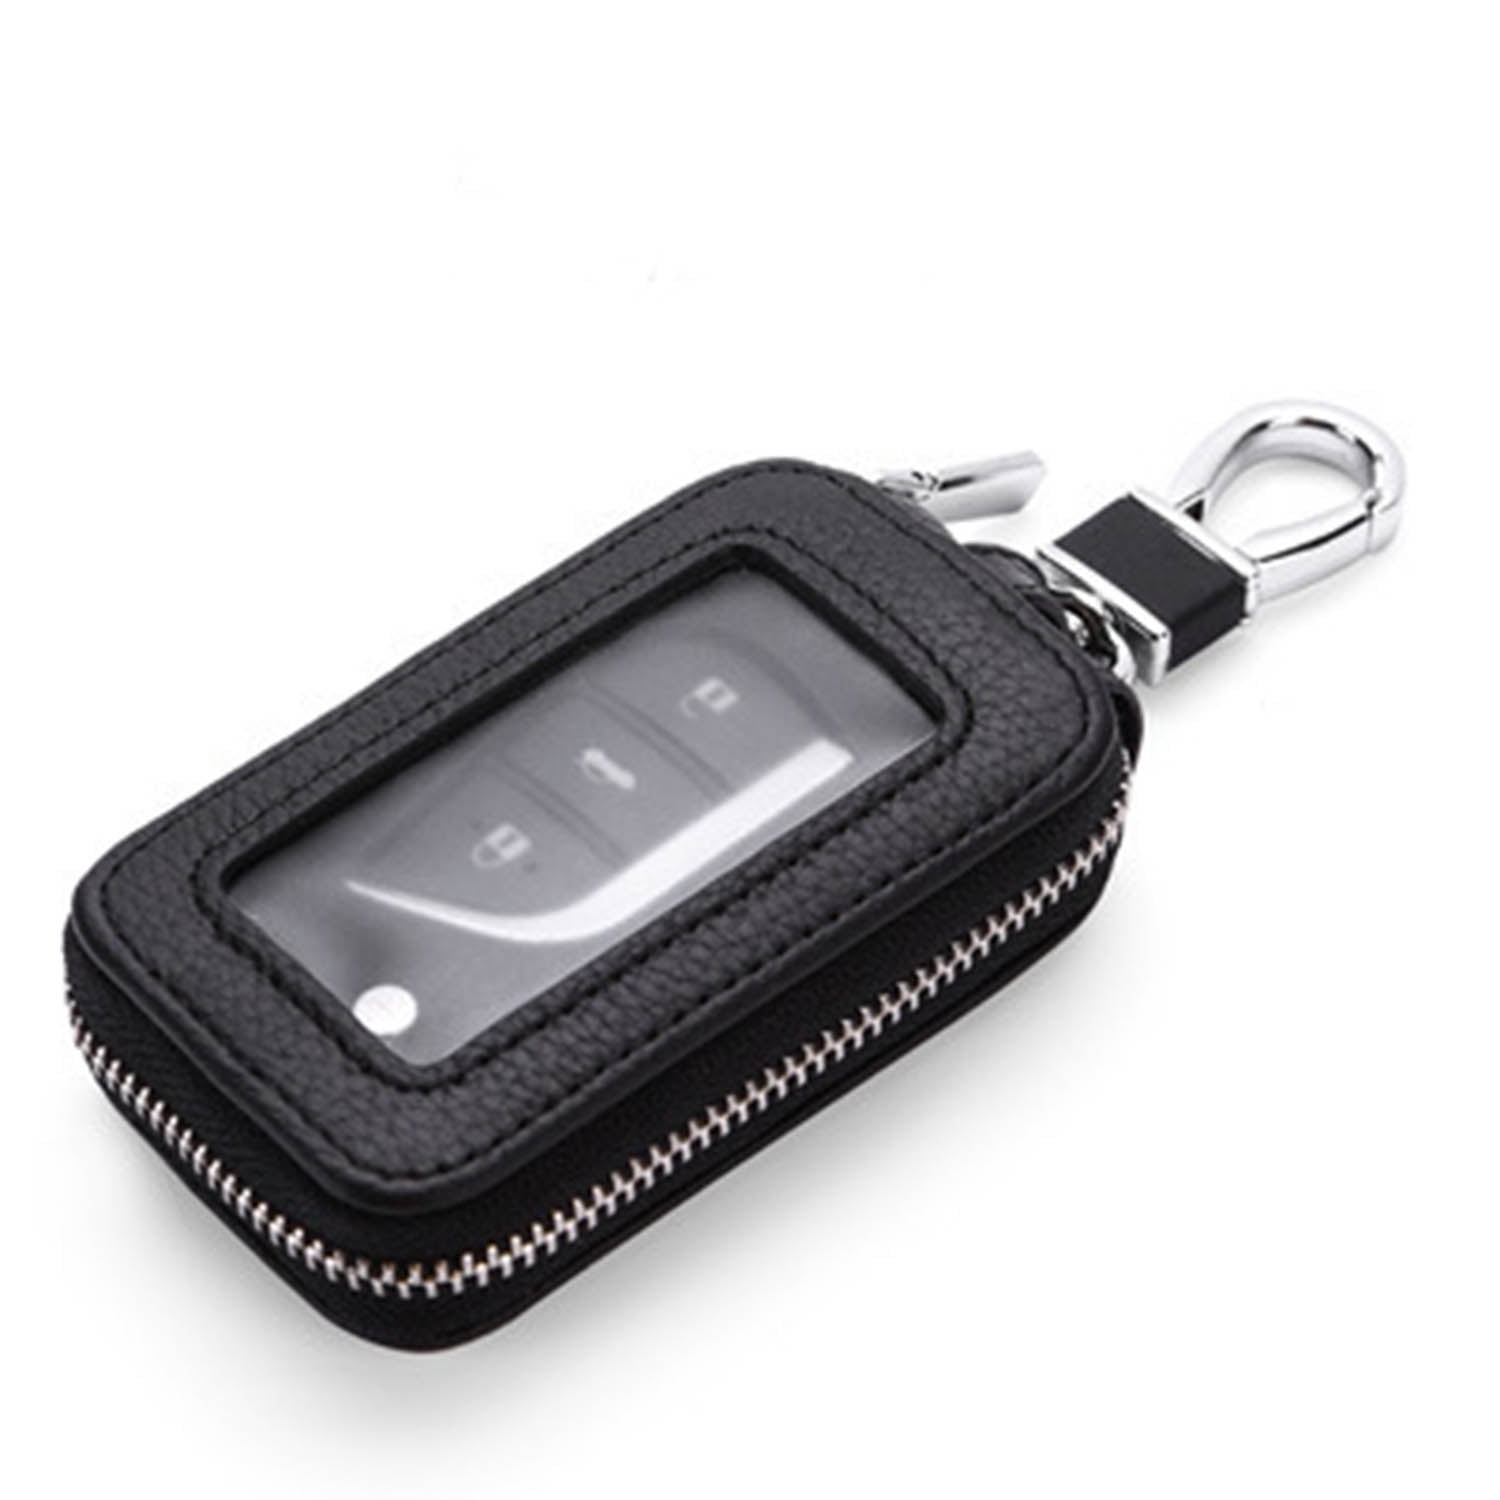 Universal Car PU Leather Smart Remote Key Chain Holder Fob Bag Case Cover YD 